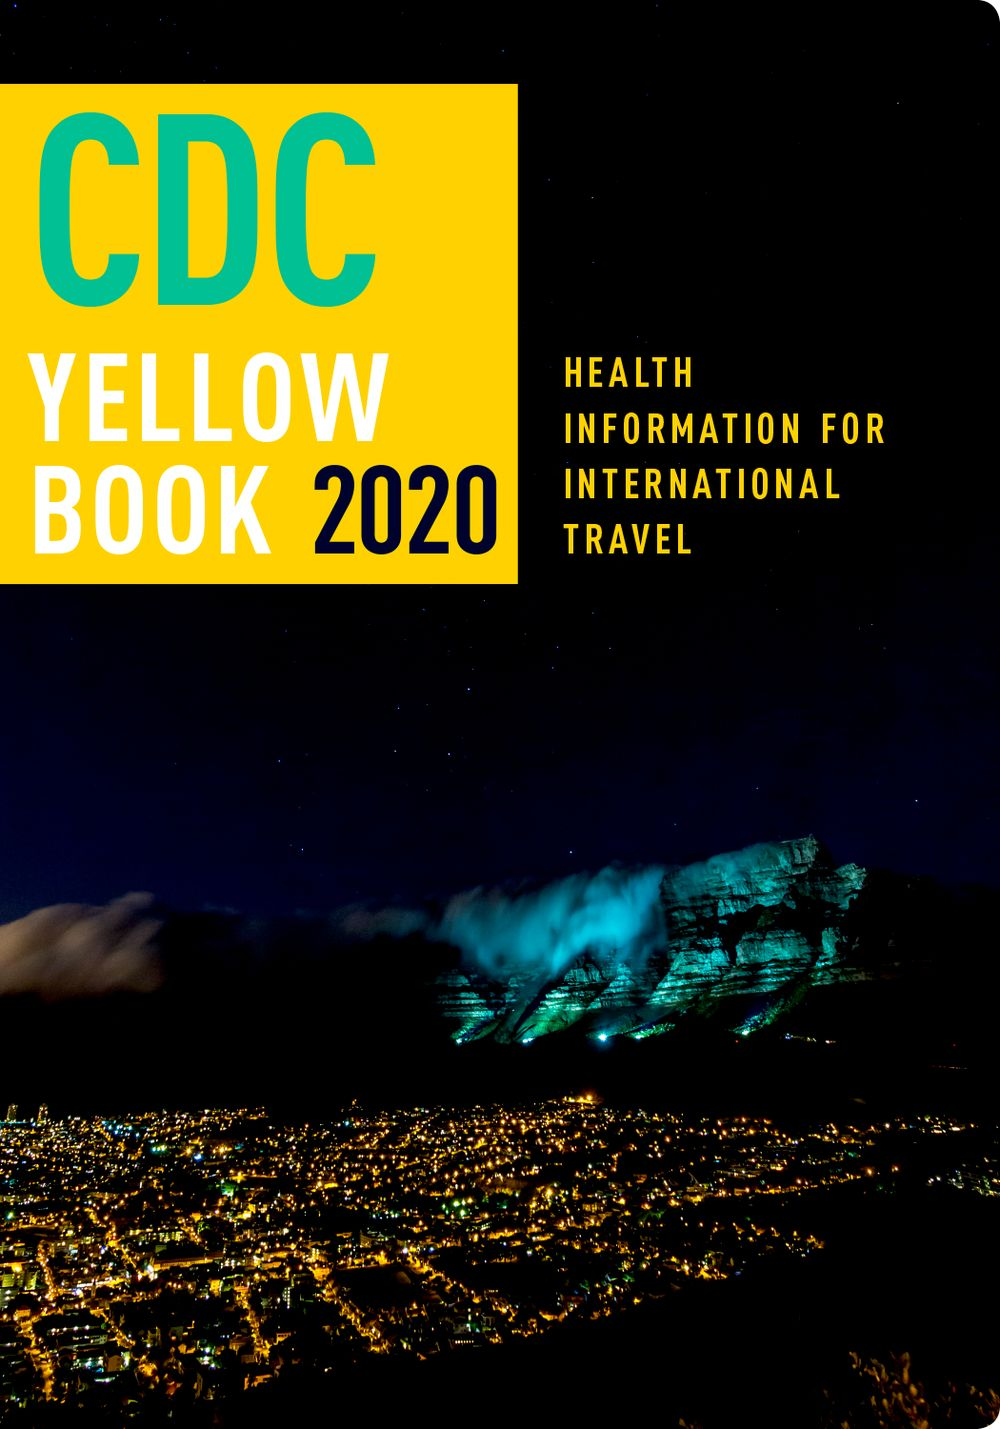 cdc travel guidelines yellow book